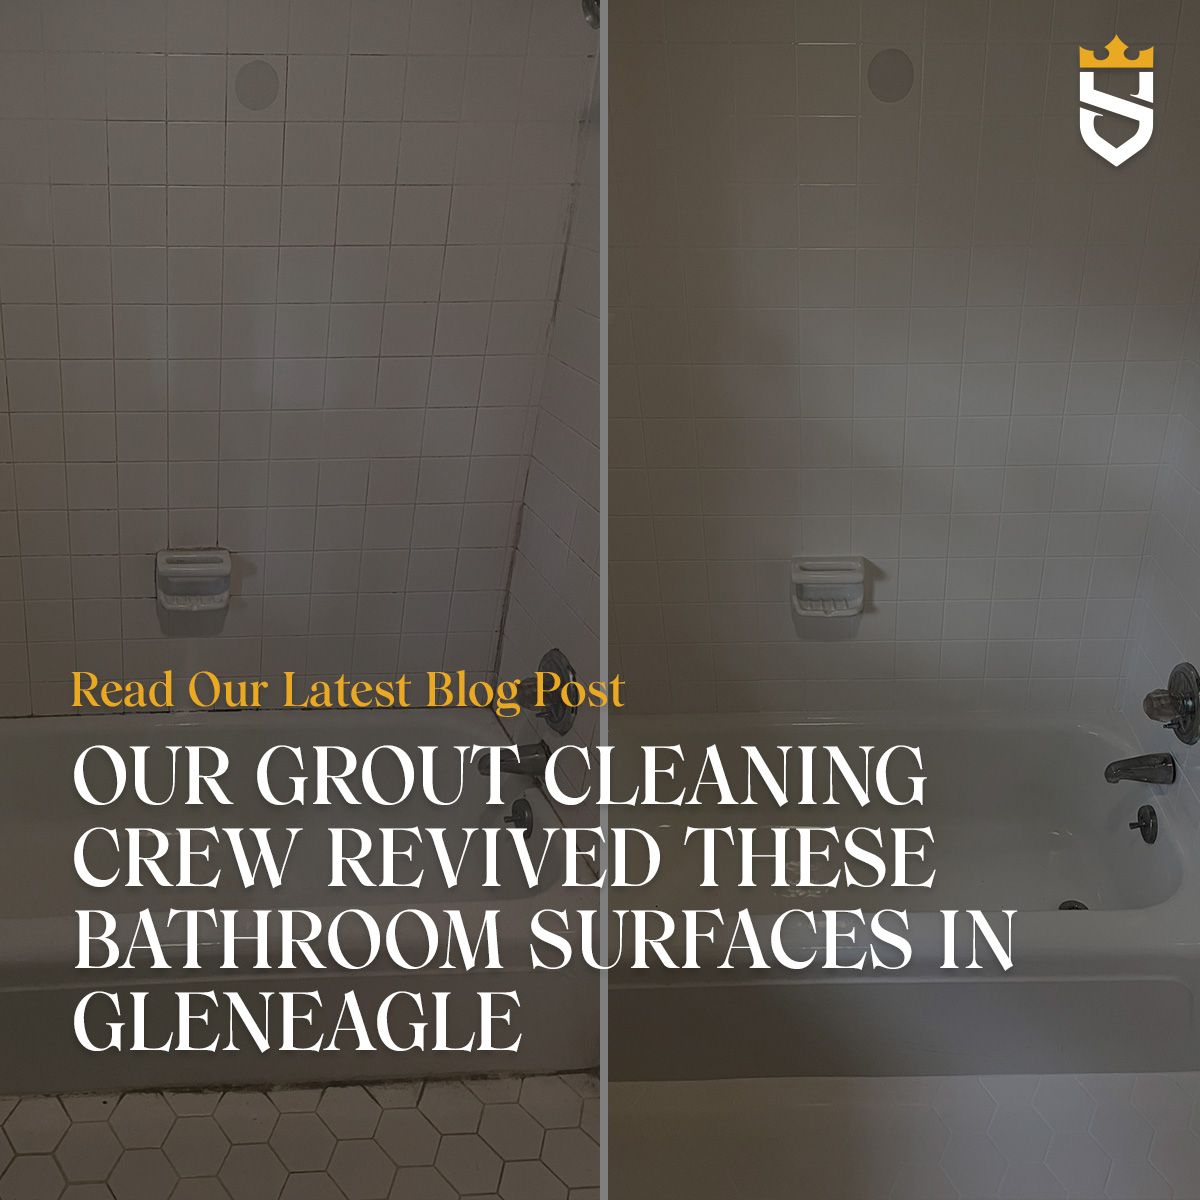 Our Grout Cleaning Crew Revived These Bathroom Surfaces in Gleneagle